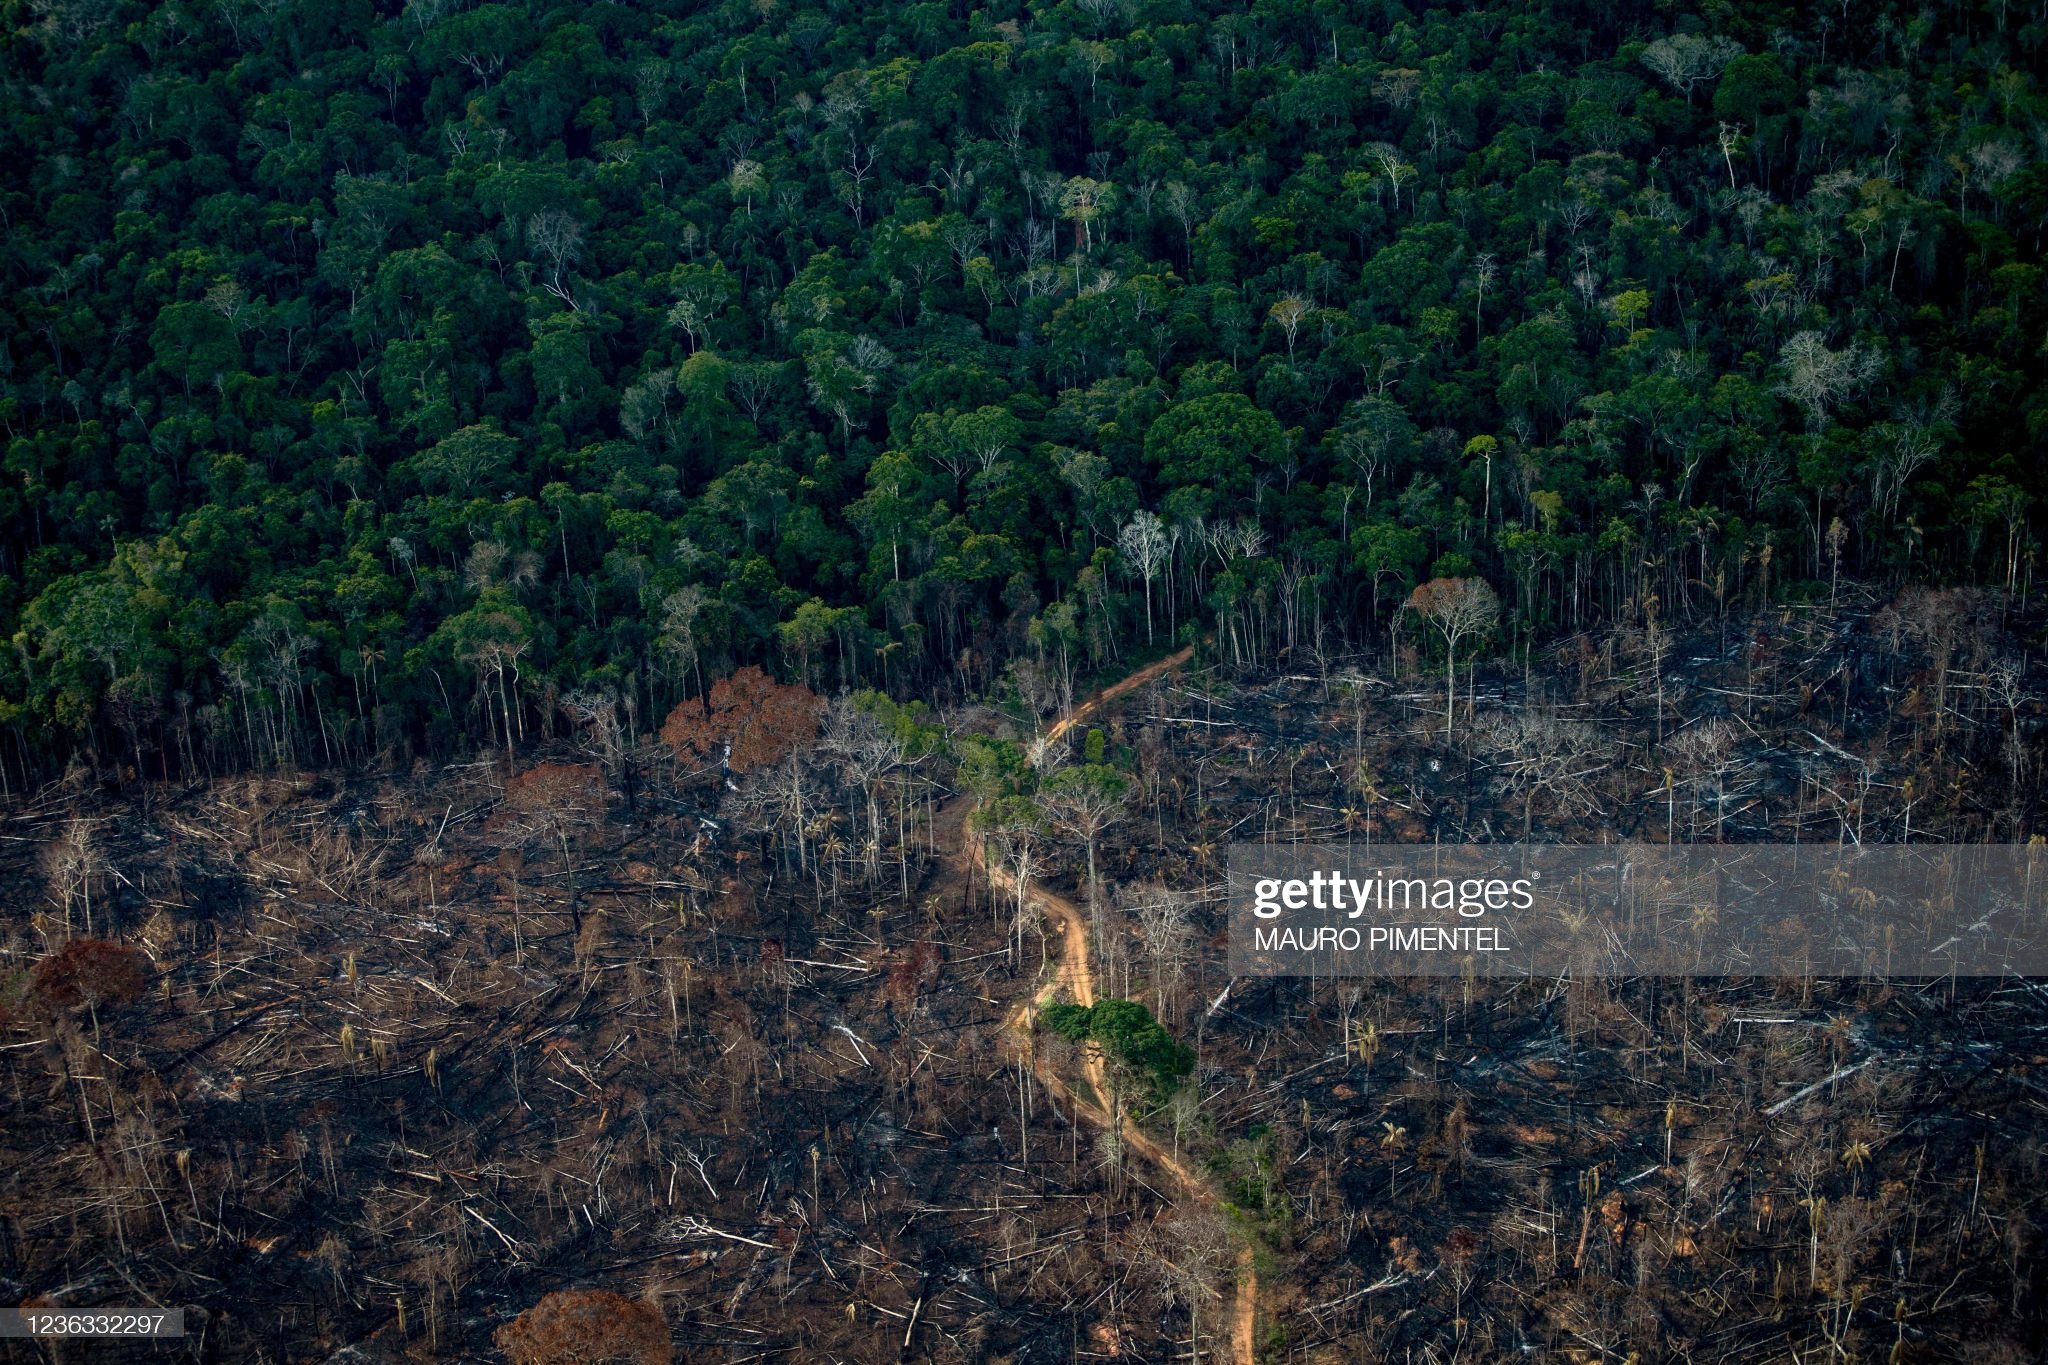 What Is Deforestation and How to Financially Fight It - The New Global Order